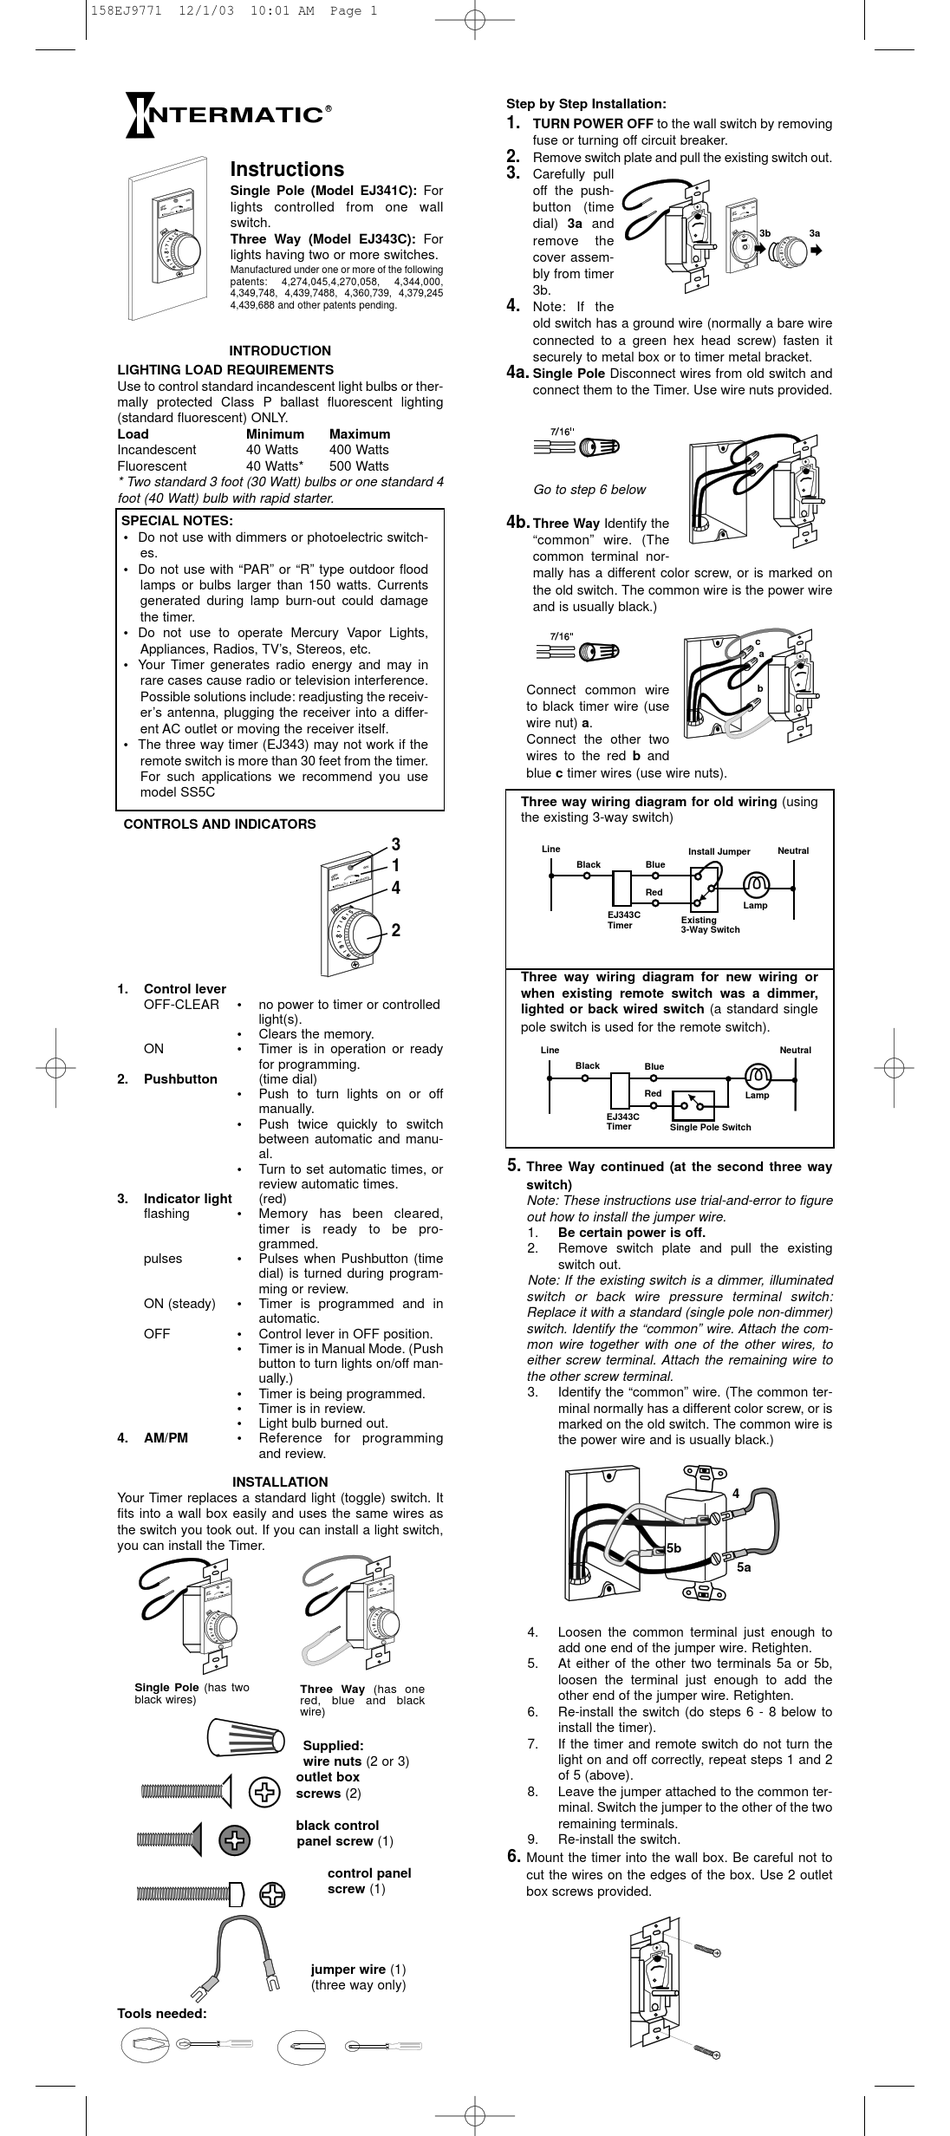 Intermatic Ej341c Instructions Pdf, Old Intermatic Outdoor Timer Instructions